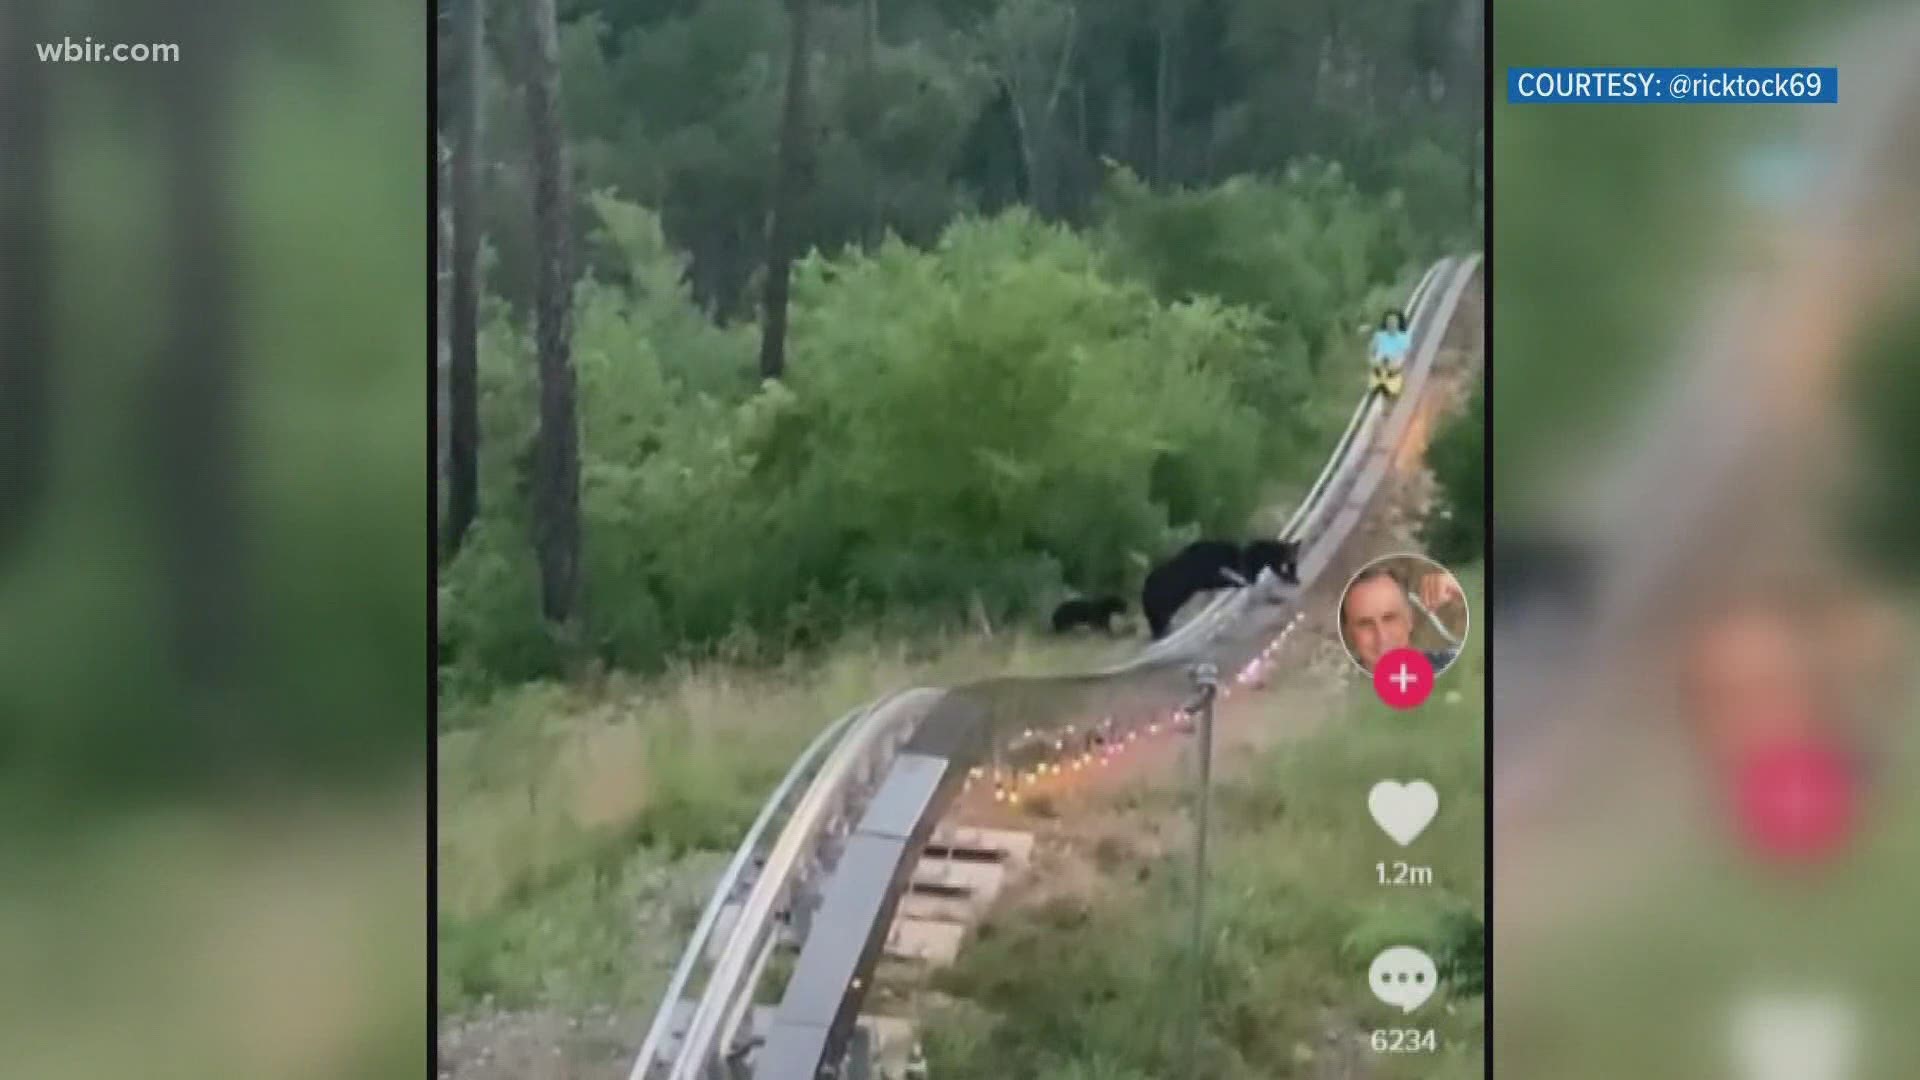 The bears actually hopped on the tracks in front of the mountain coaster rider as he was descending a hill.